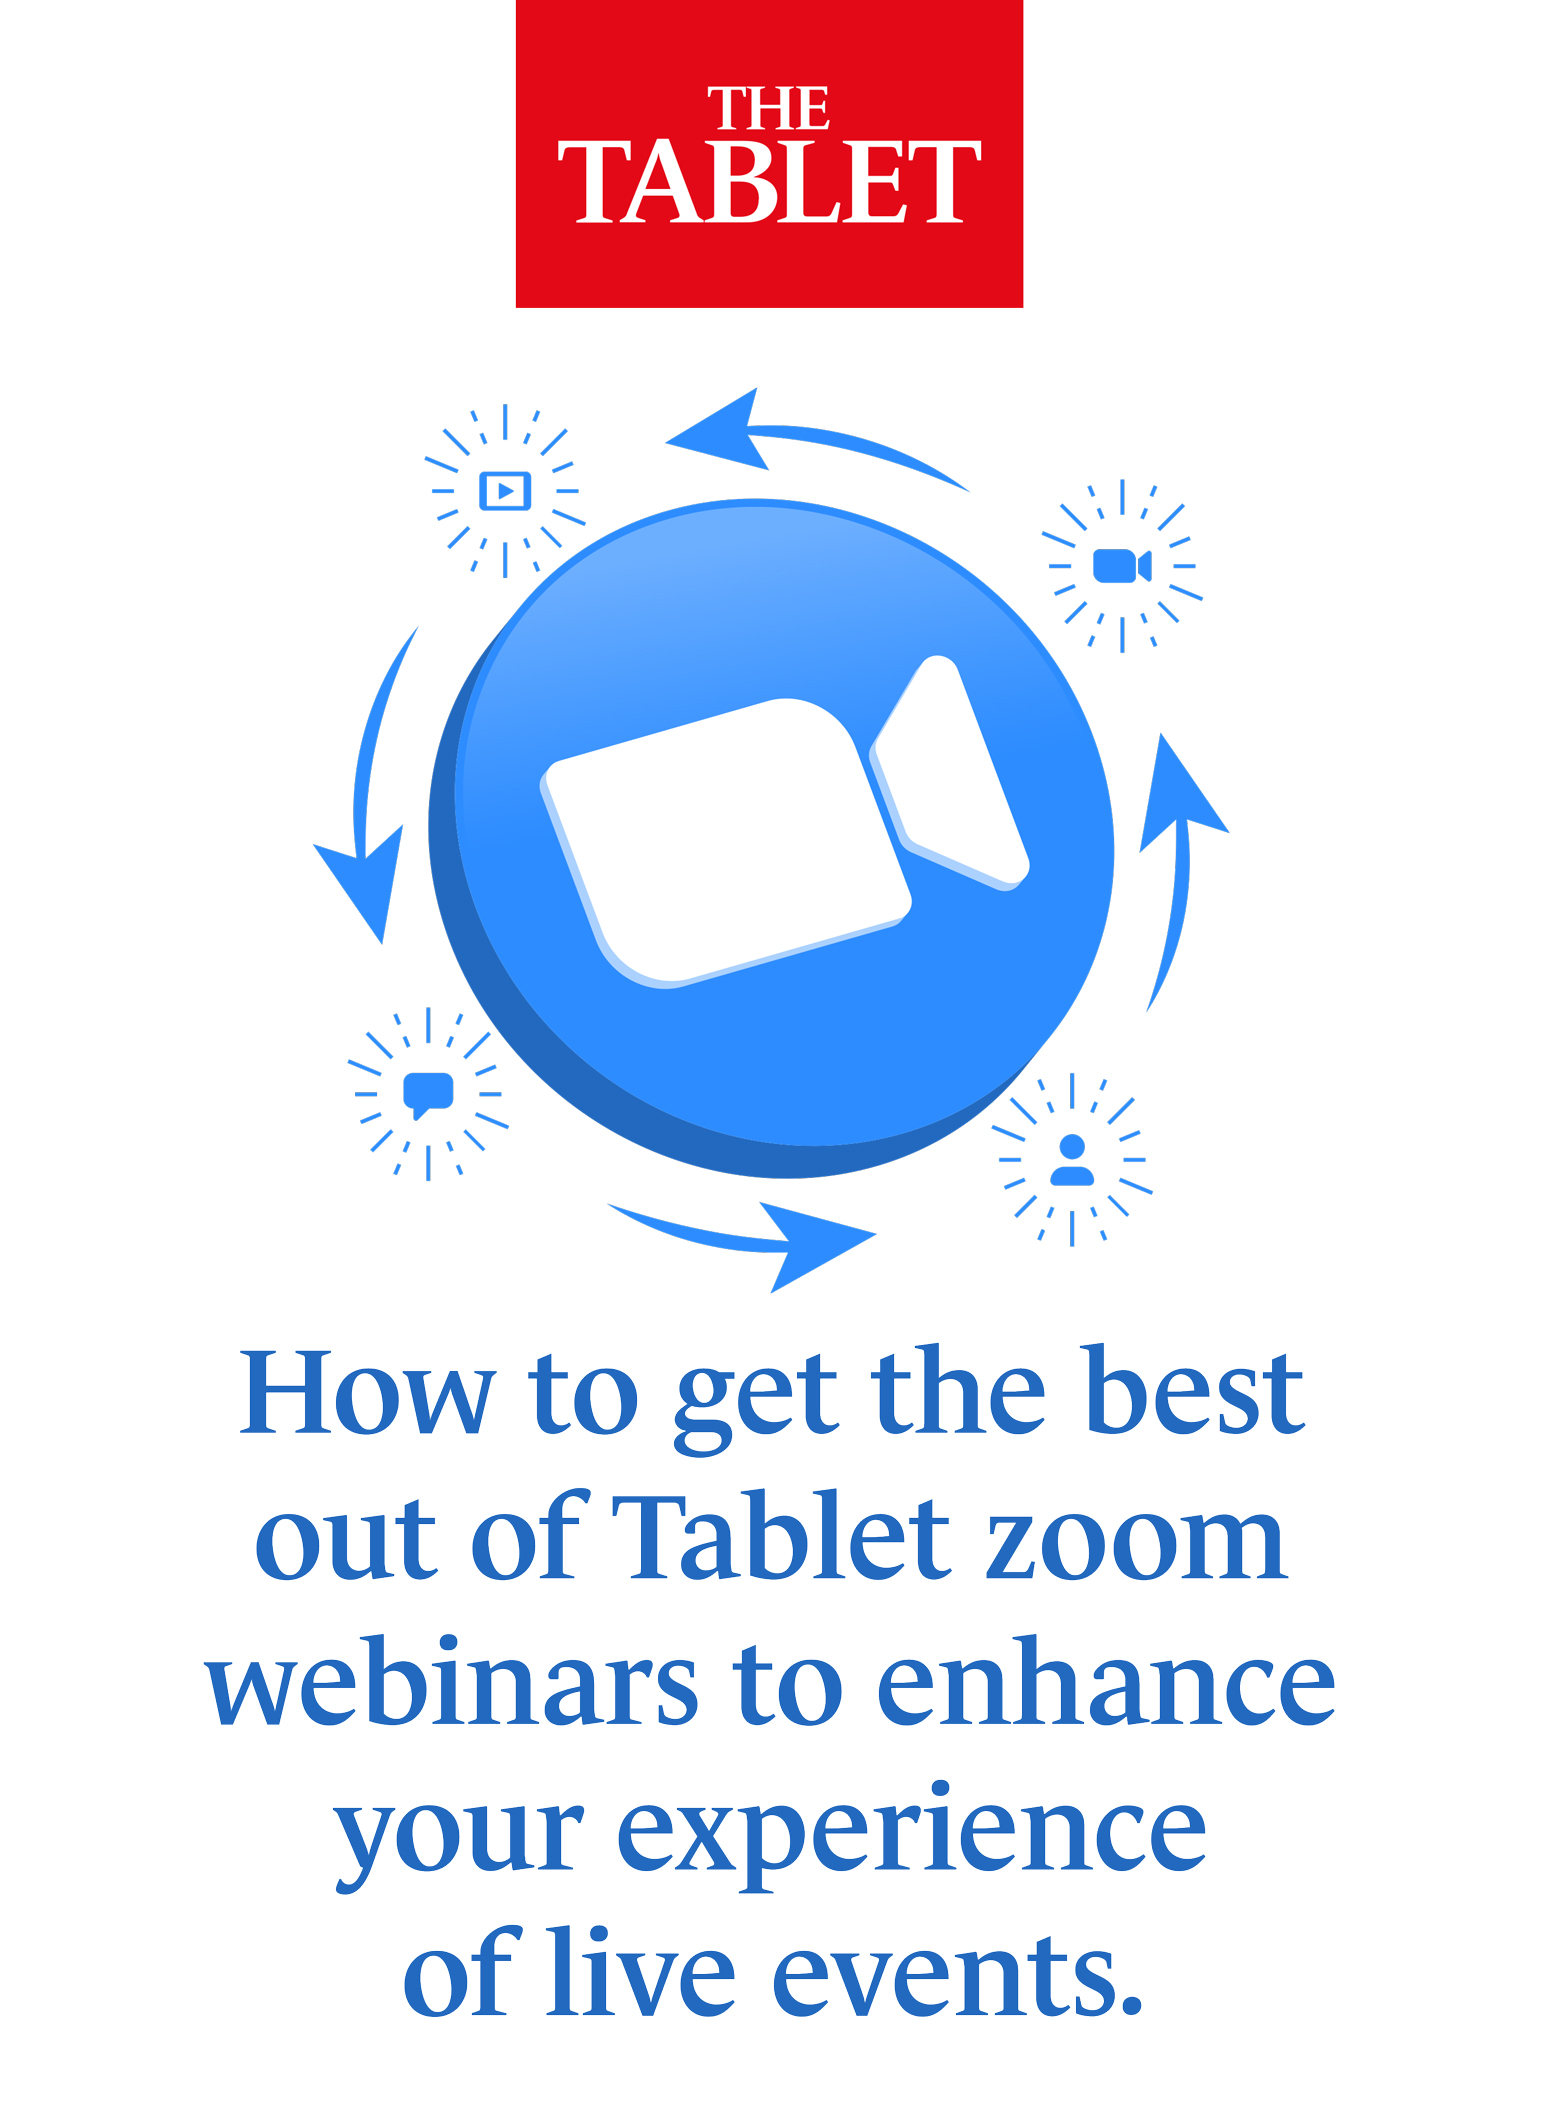 Webinar: How to get the best out of Tablet zoom webinars to enhance your experience of live events